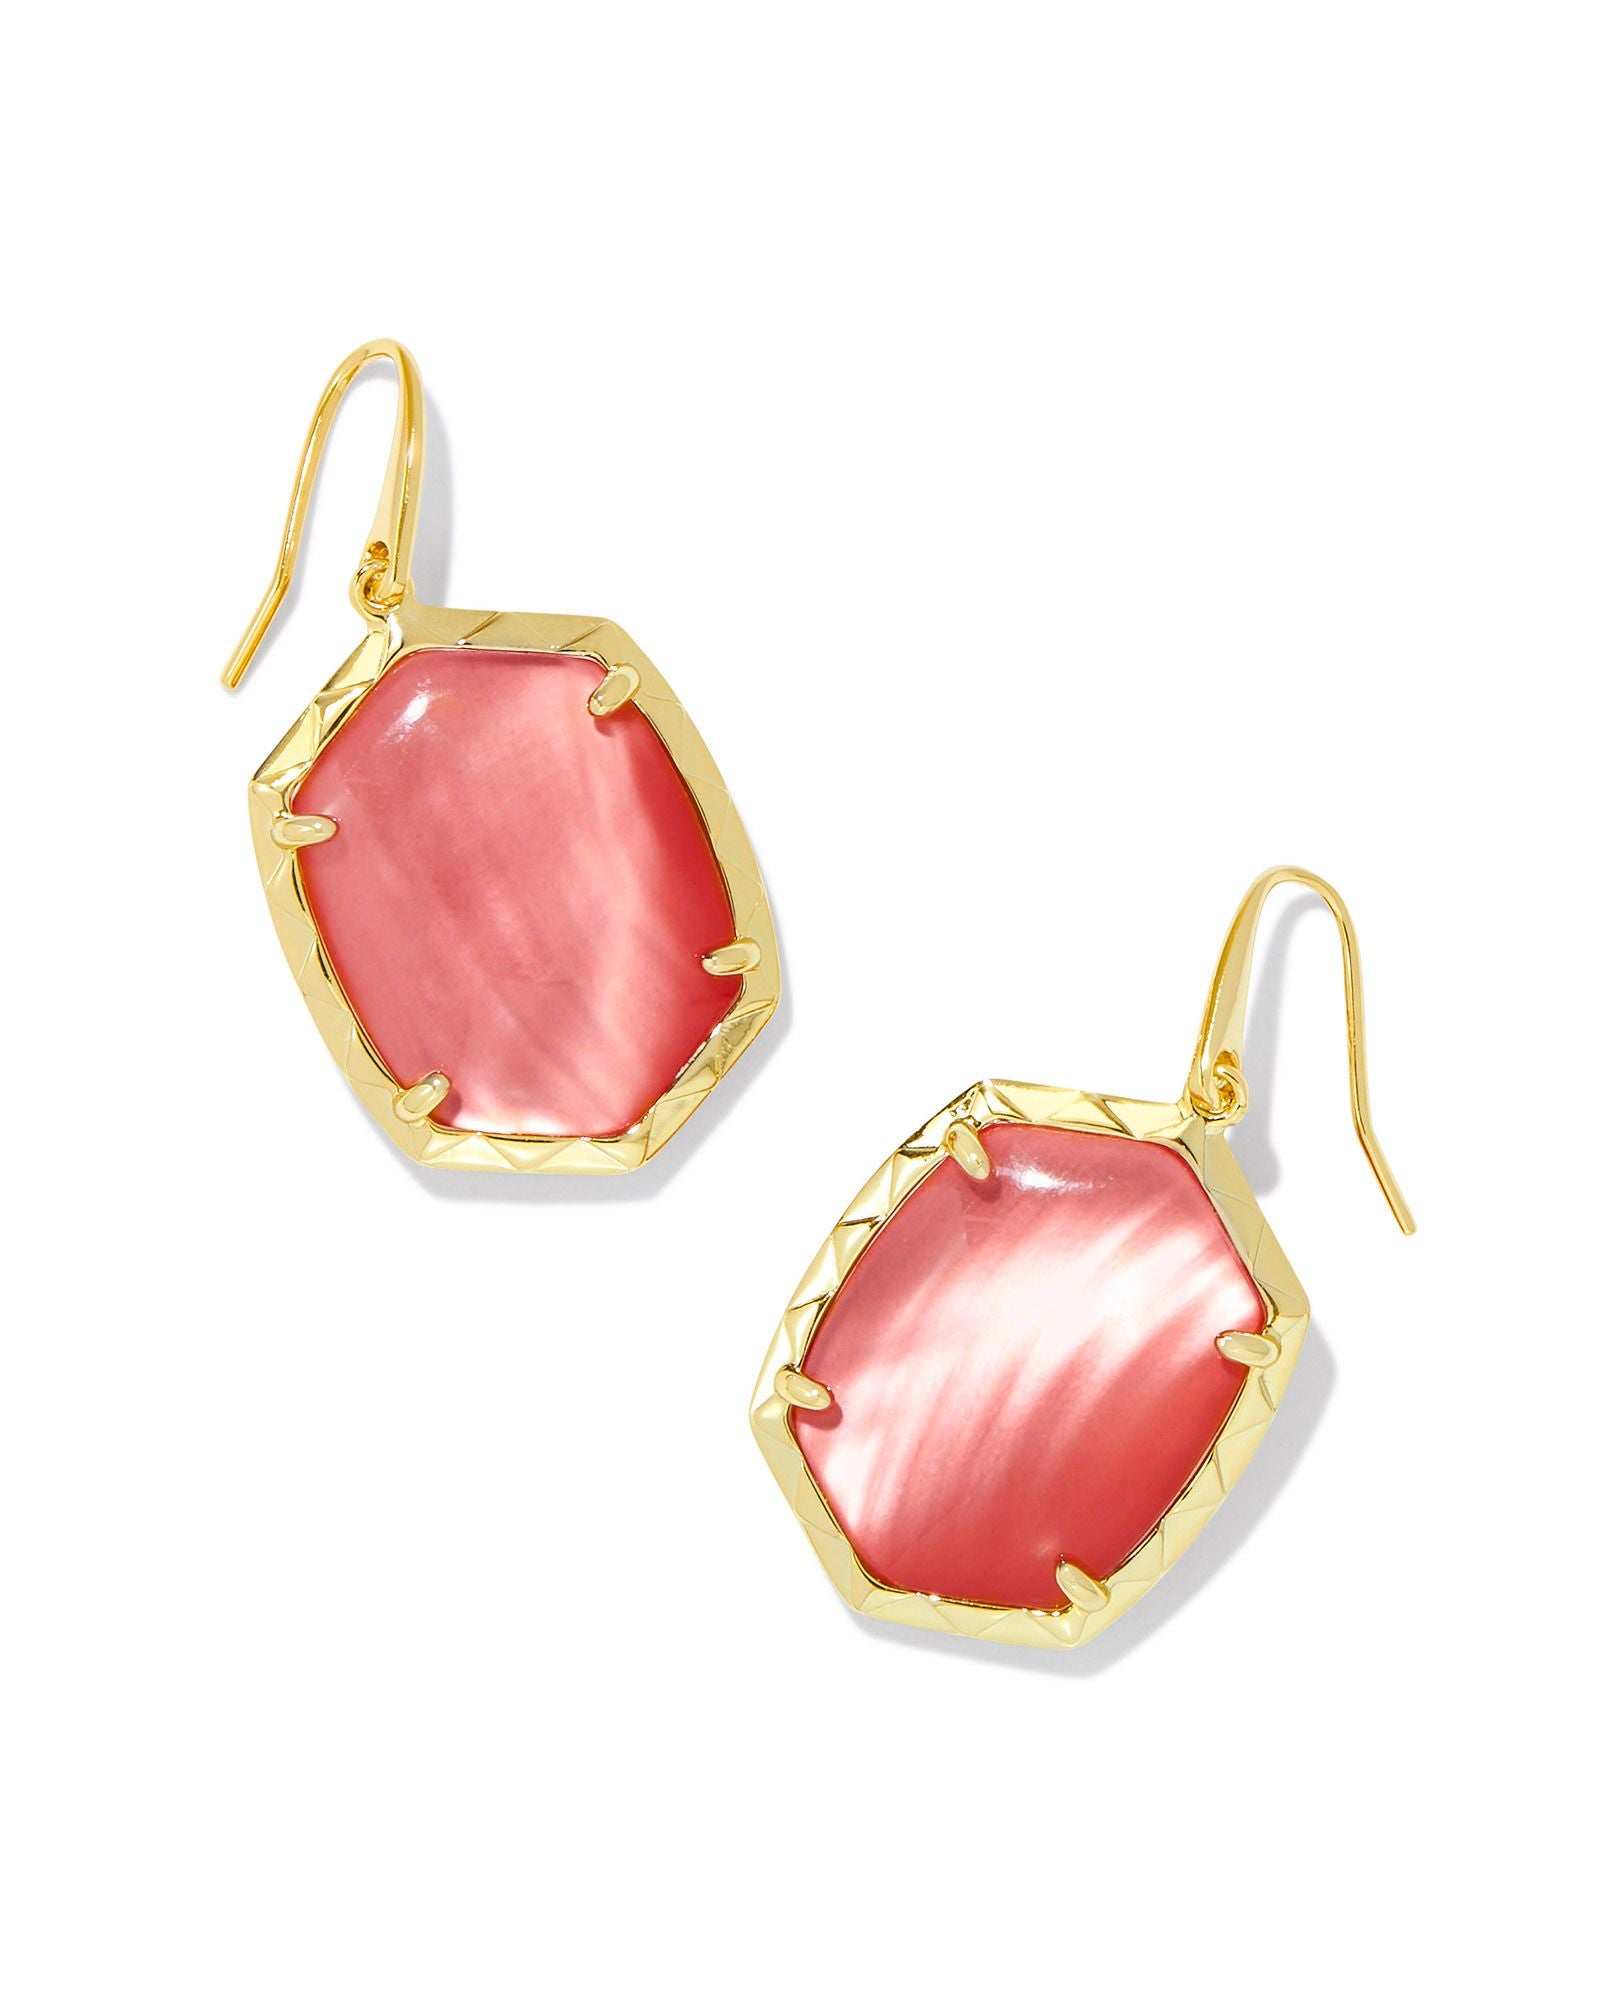 Daphne Gold Drop Earrings in Coral Pink Mother-of-Pearl